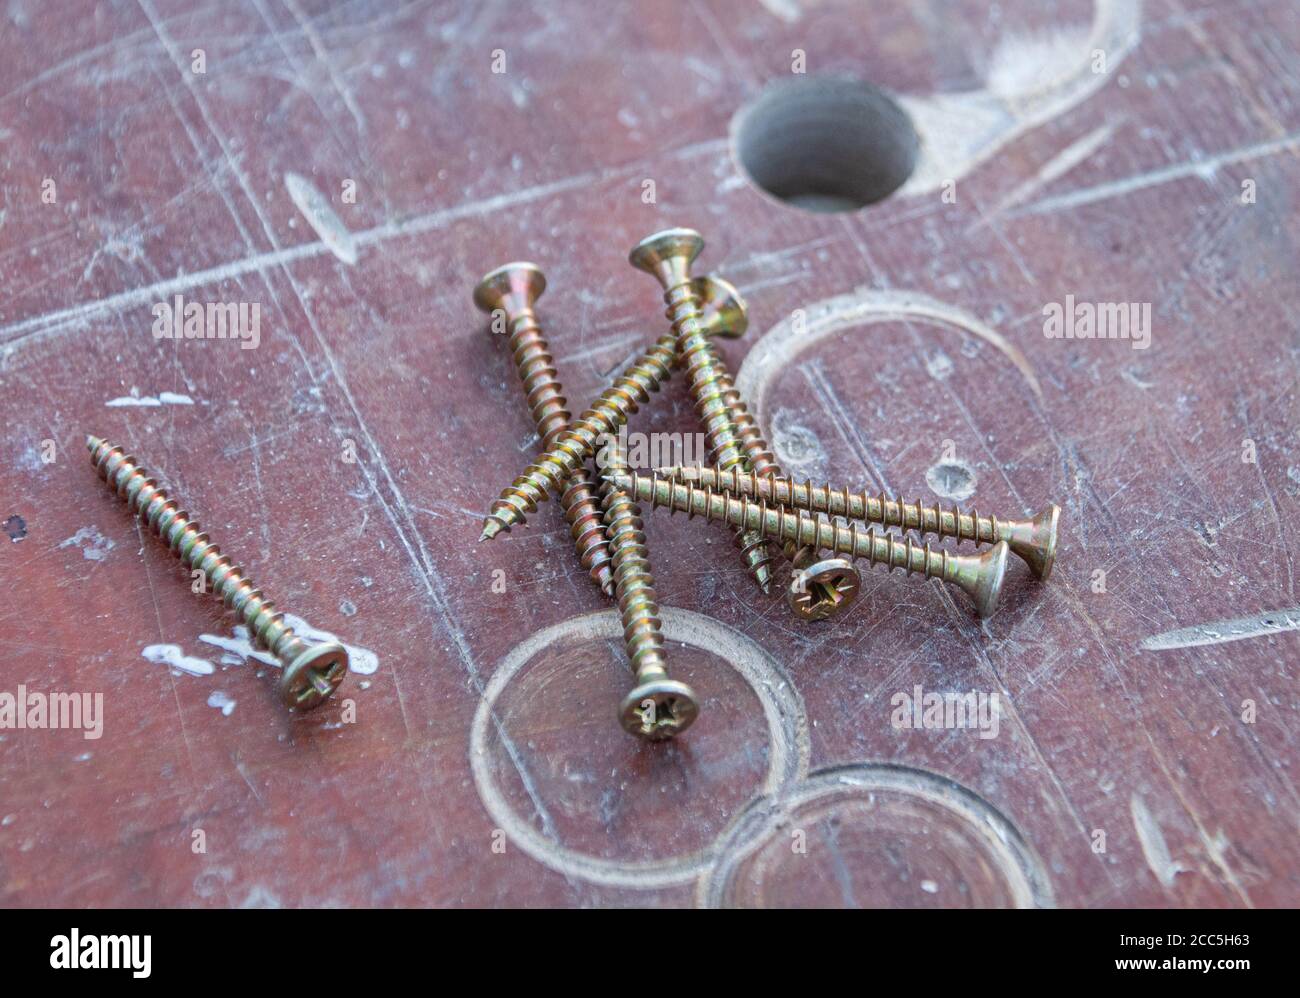 Pile of screws on a cut up wooden work bench being used for home improvements Stock Photo